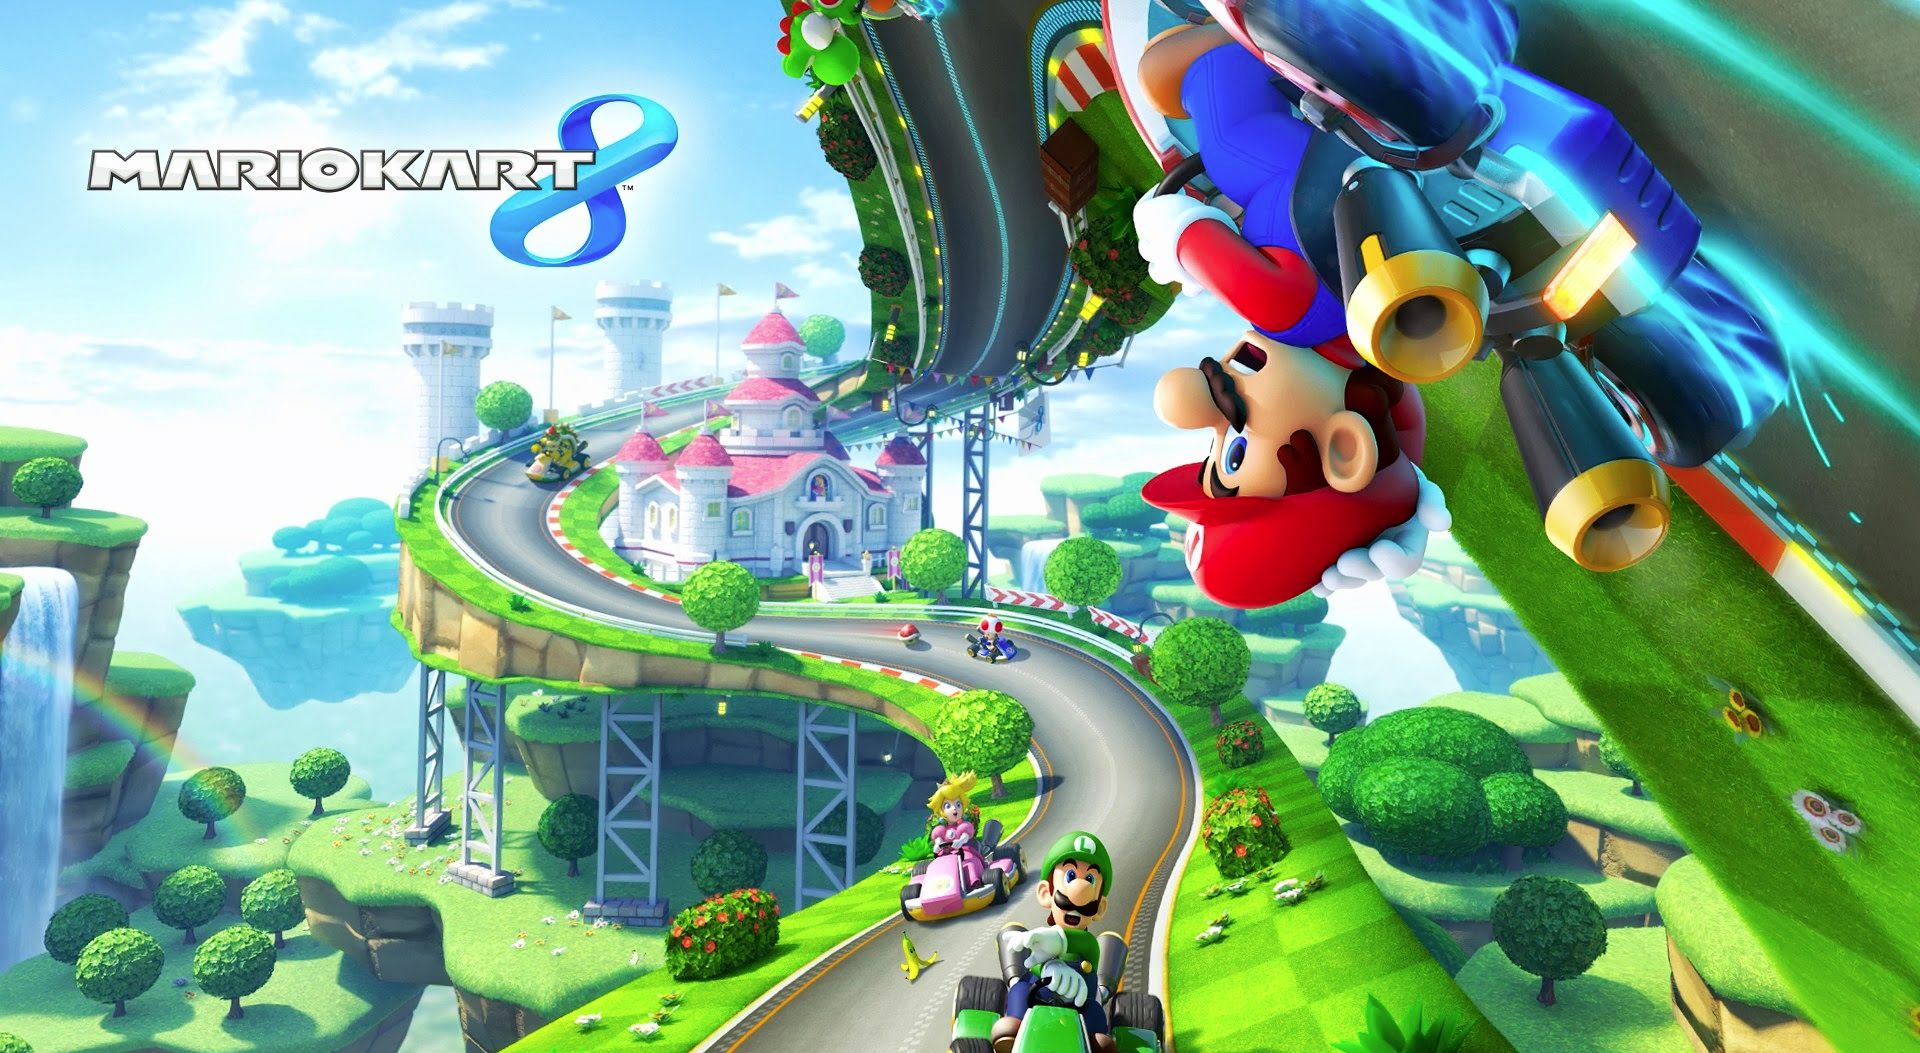 Mario Kart 8 Release Date In May Watch New Game Play And Info Trailer Here Ibtimes 3958